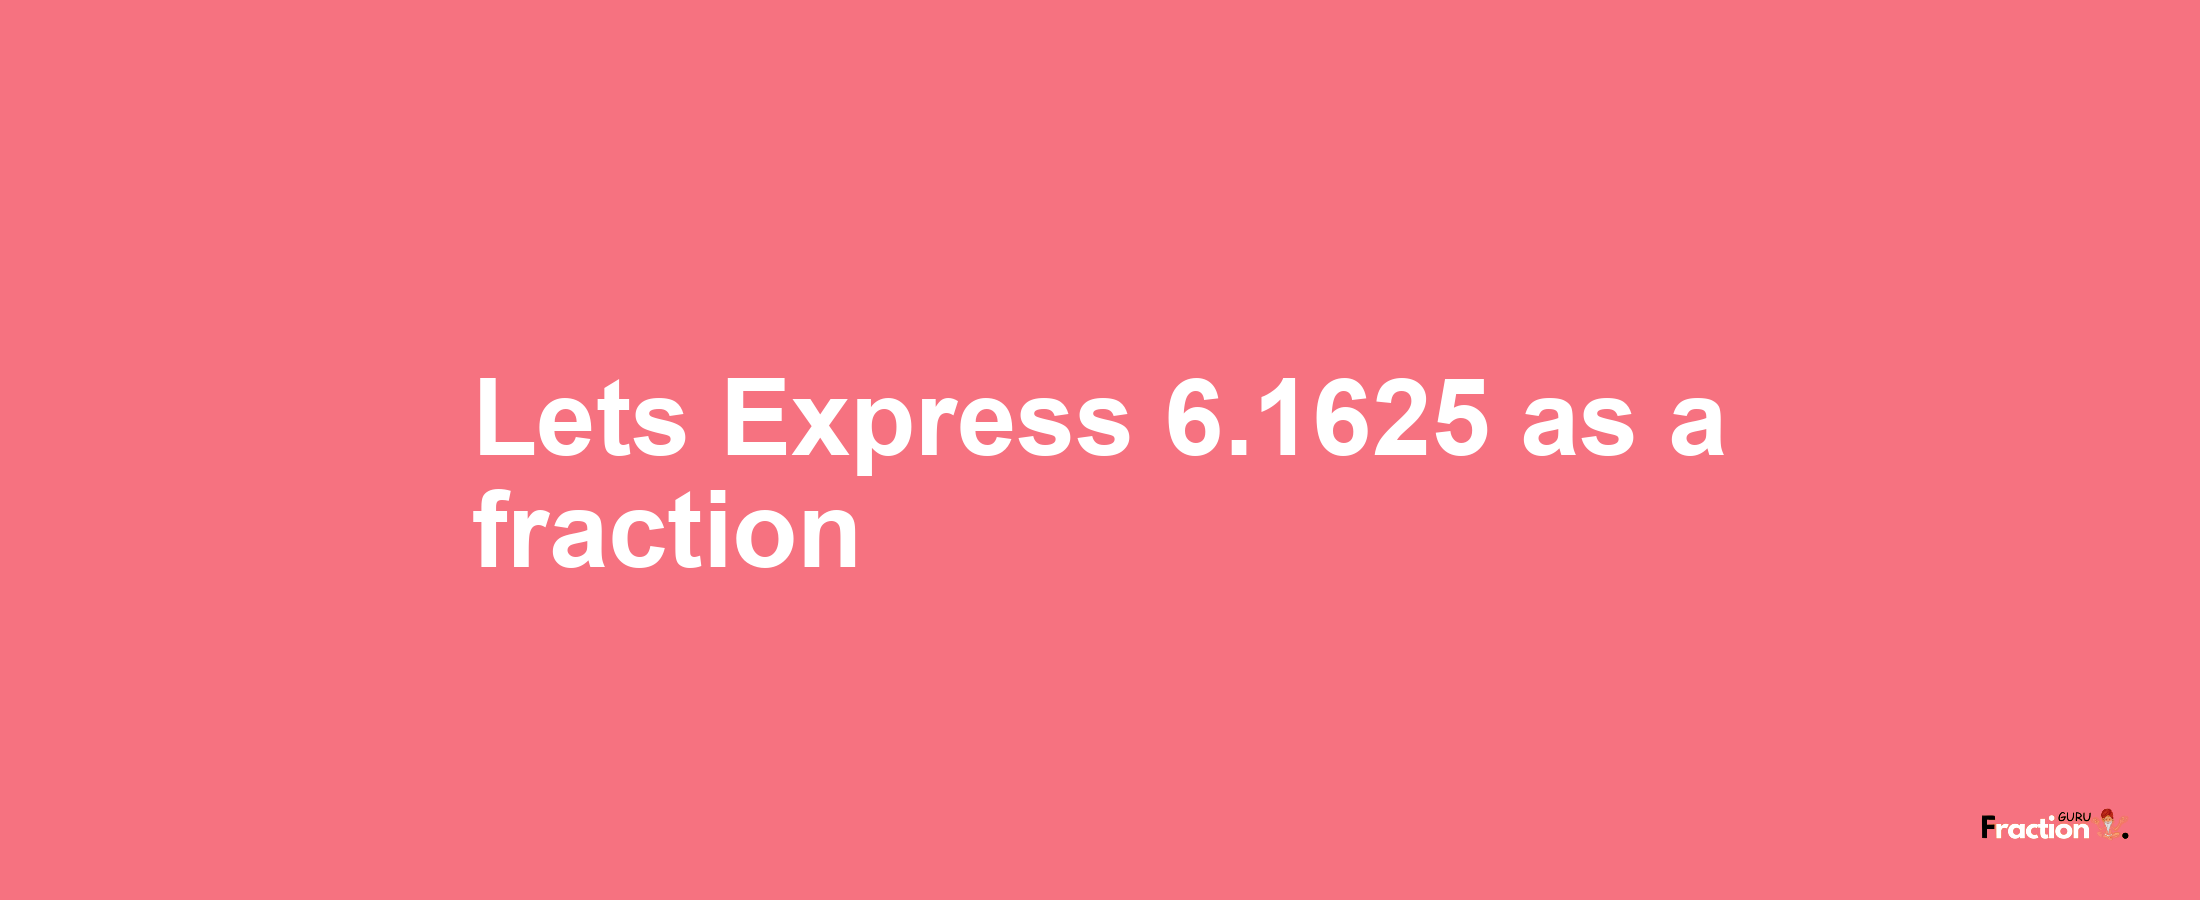 Lets Express 6.1625 as afraction